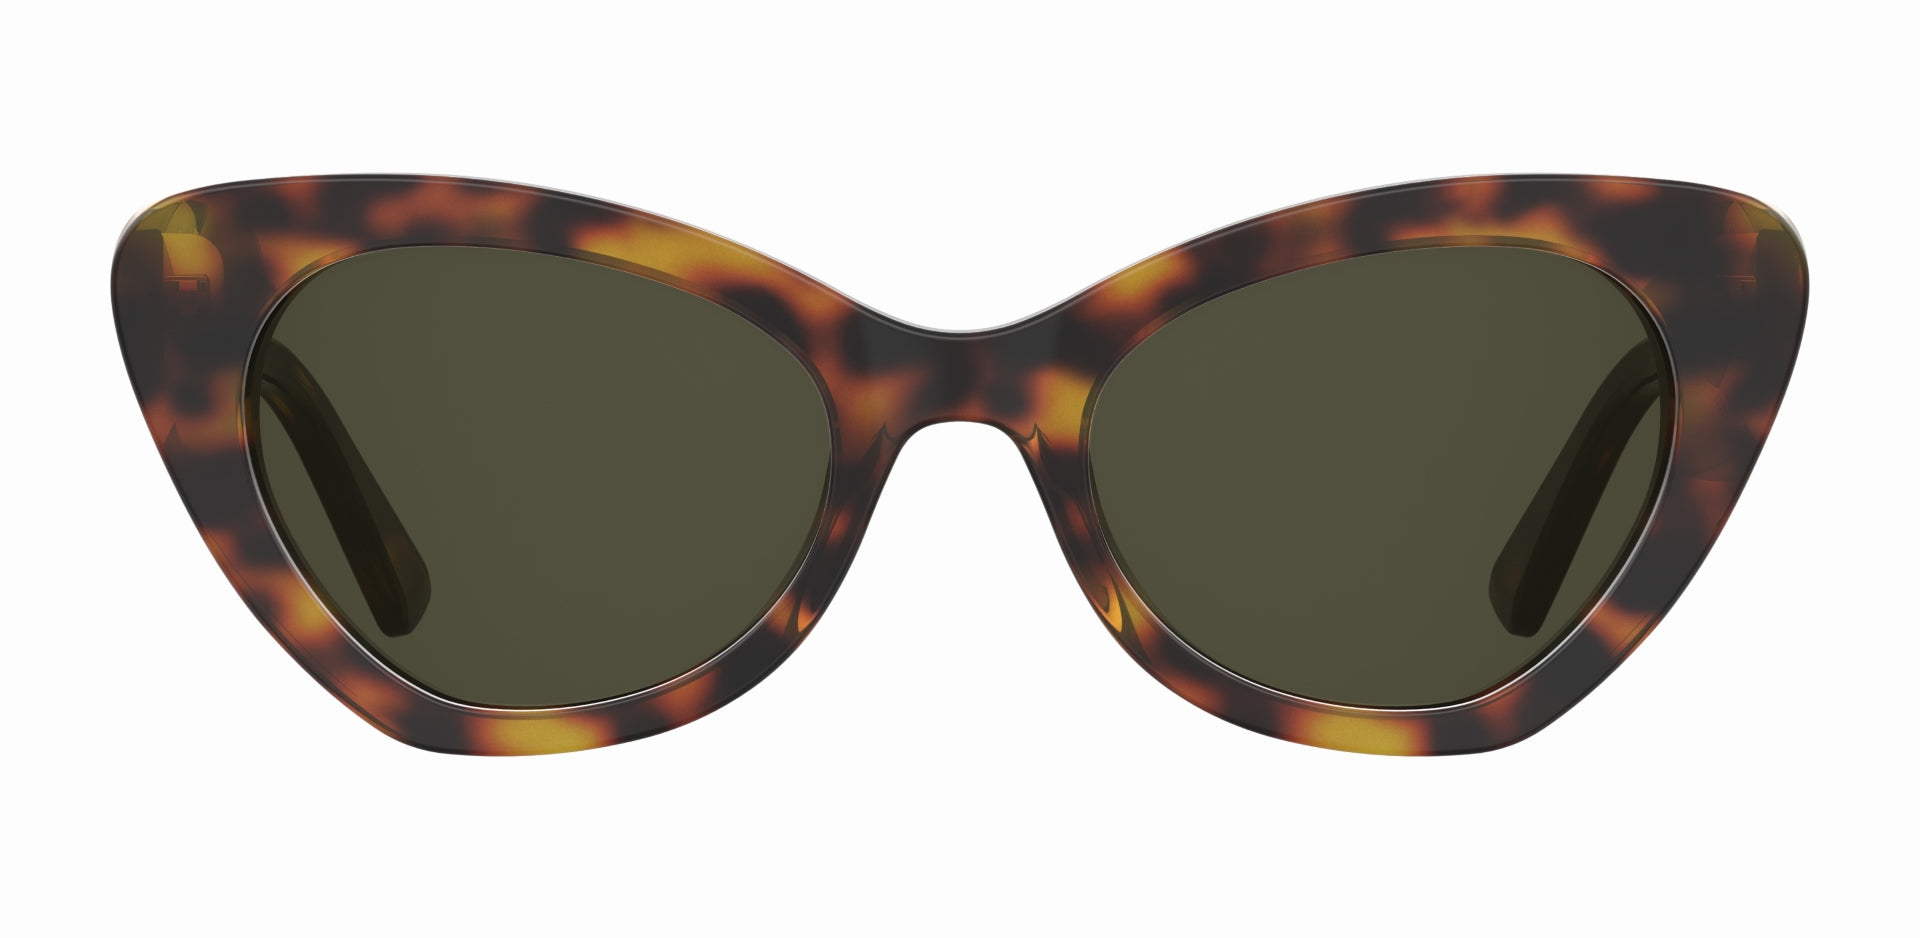 Original Moschino Eyewear Collection: Discounted Prices & Free Shipping ...